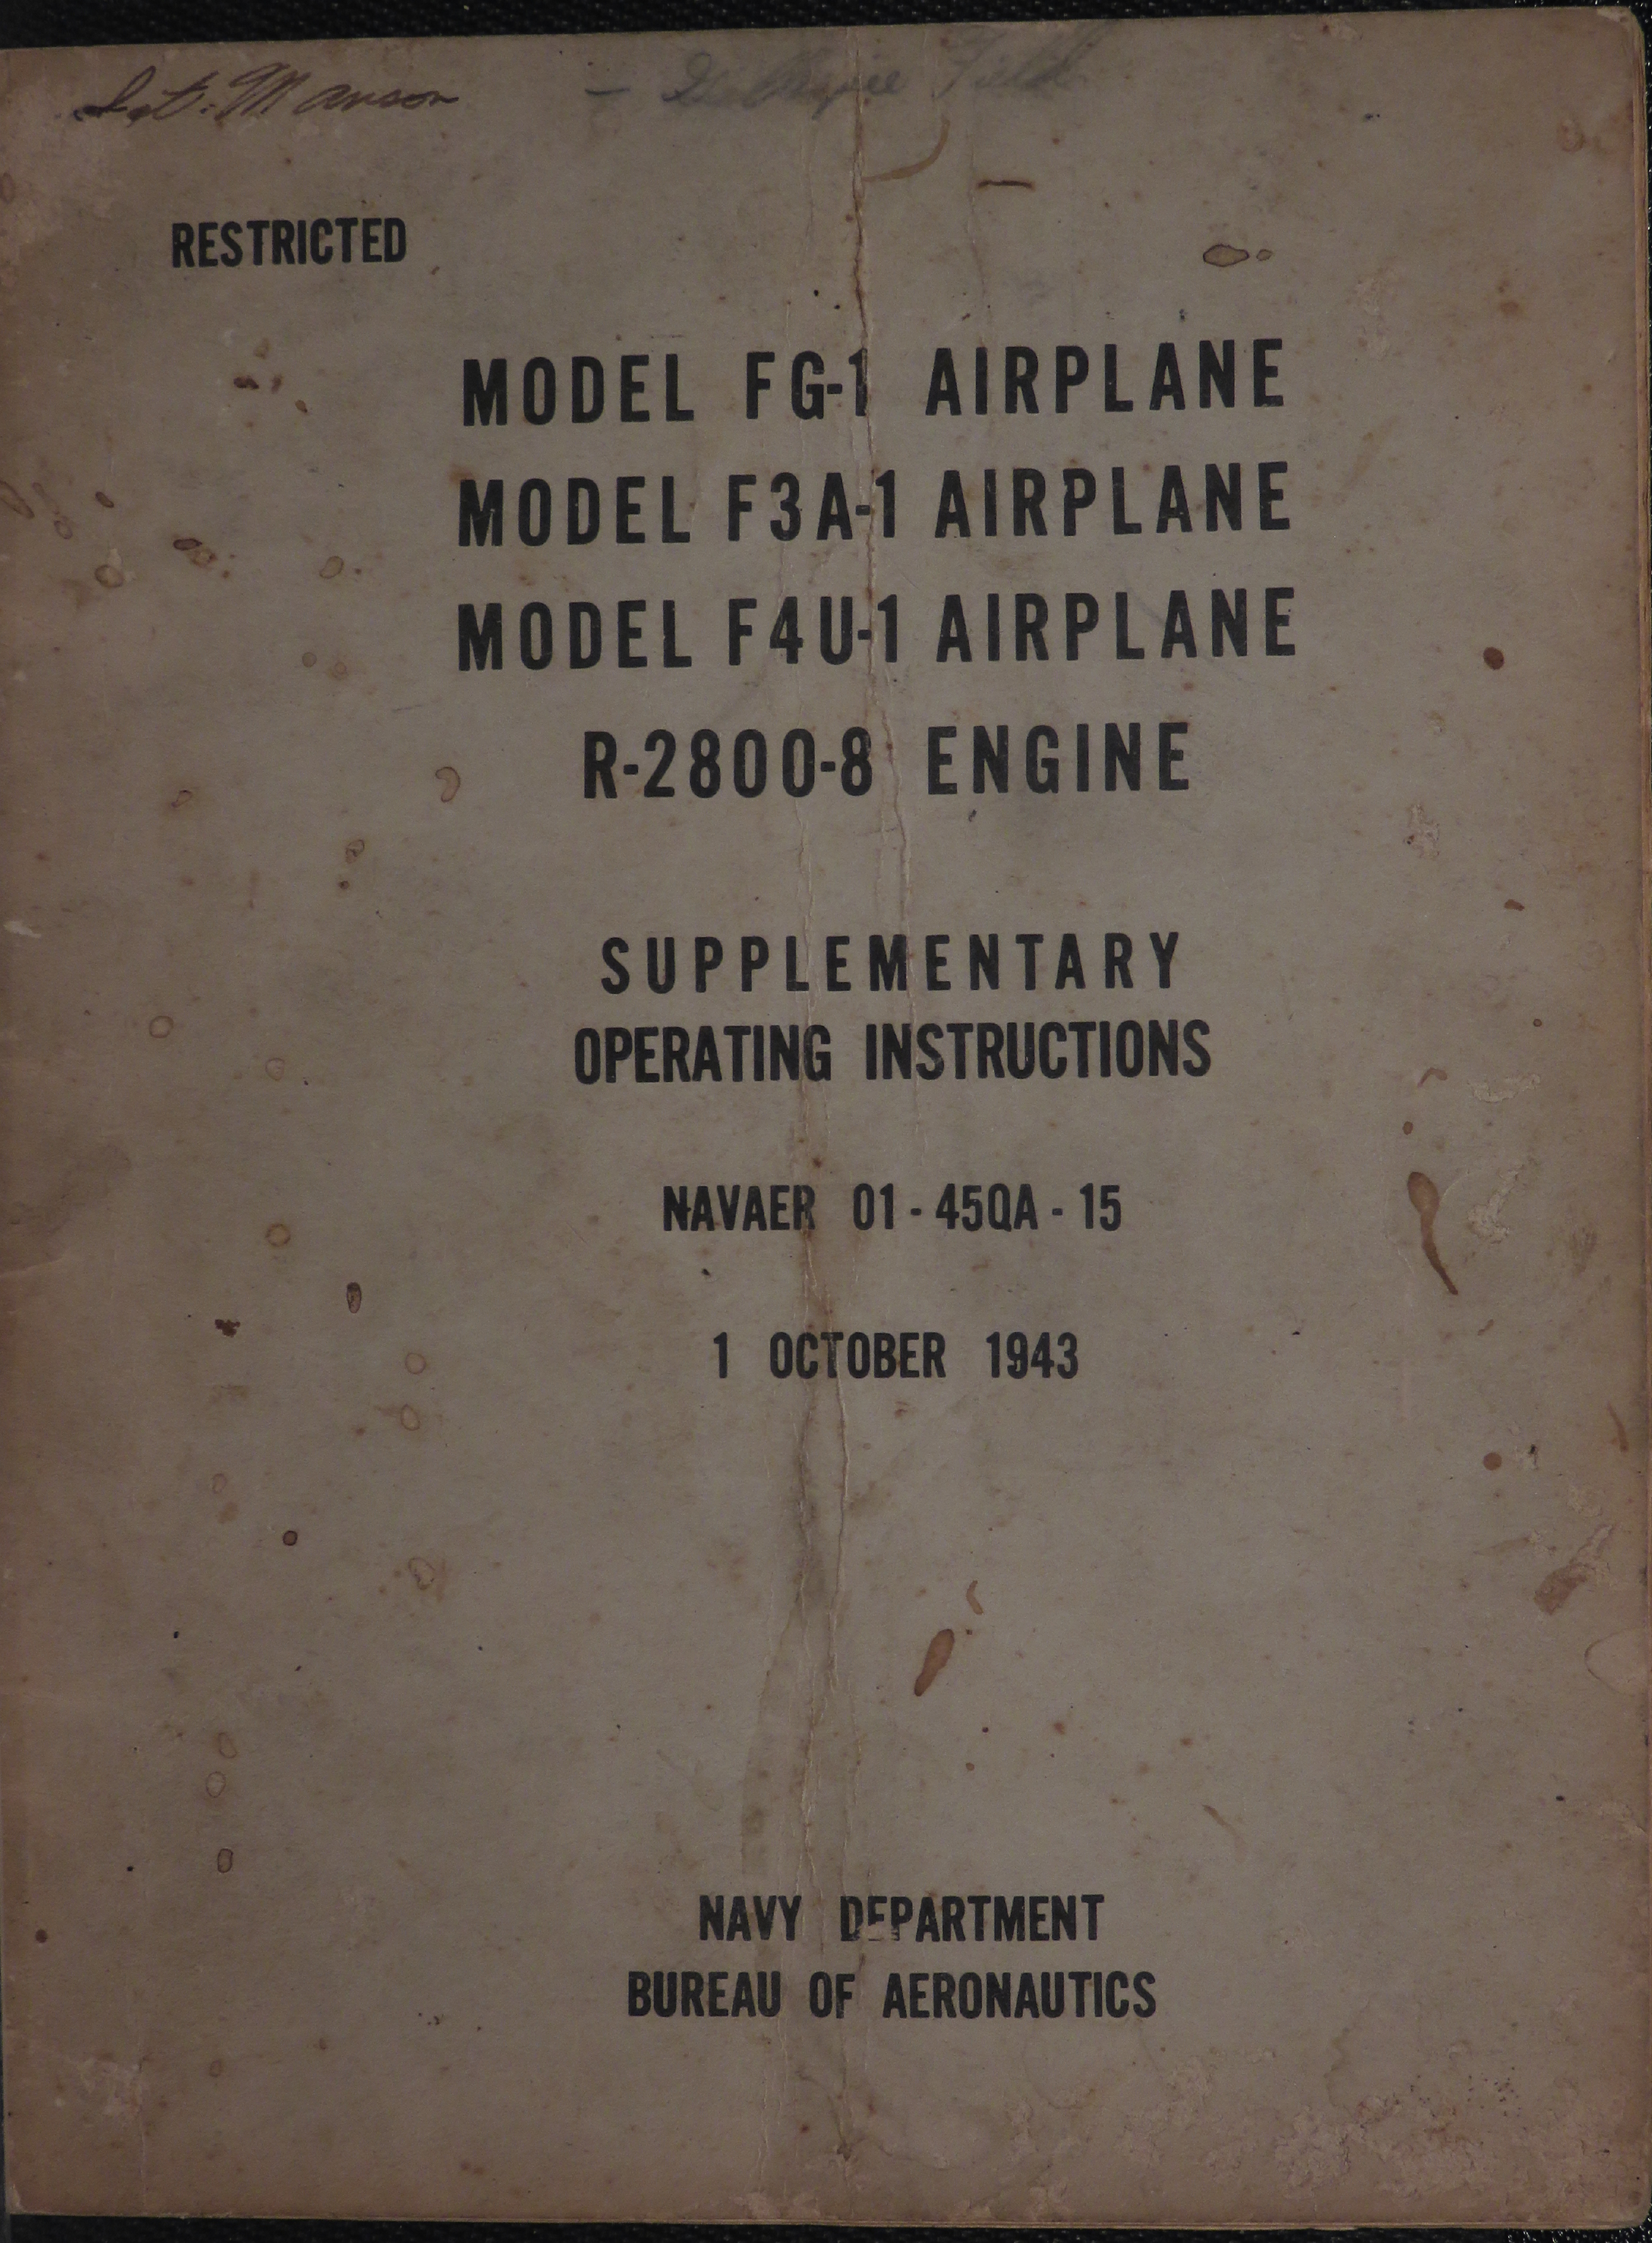 Sample page 1 from AirCorps Library document: Supplementary Operating Instructions for Model FG-1, F3A-1, F4U-1 Airplane with R-2800-8 Engine